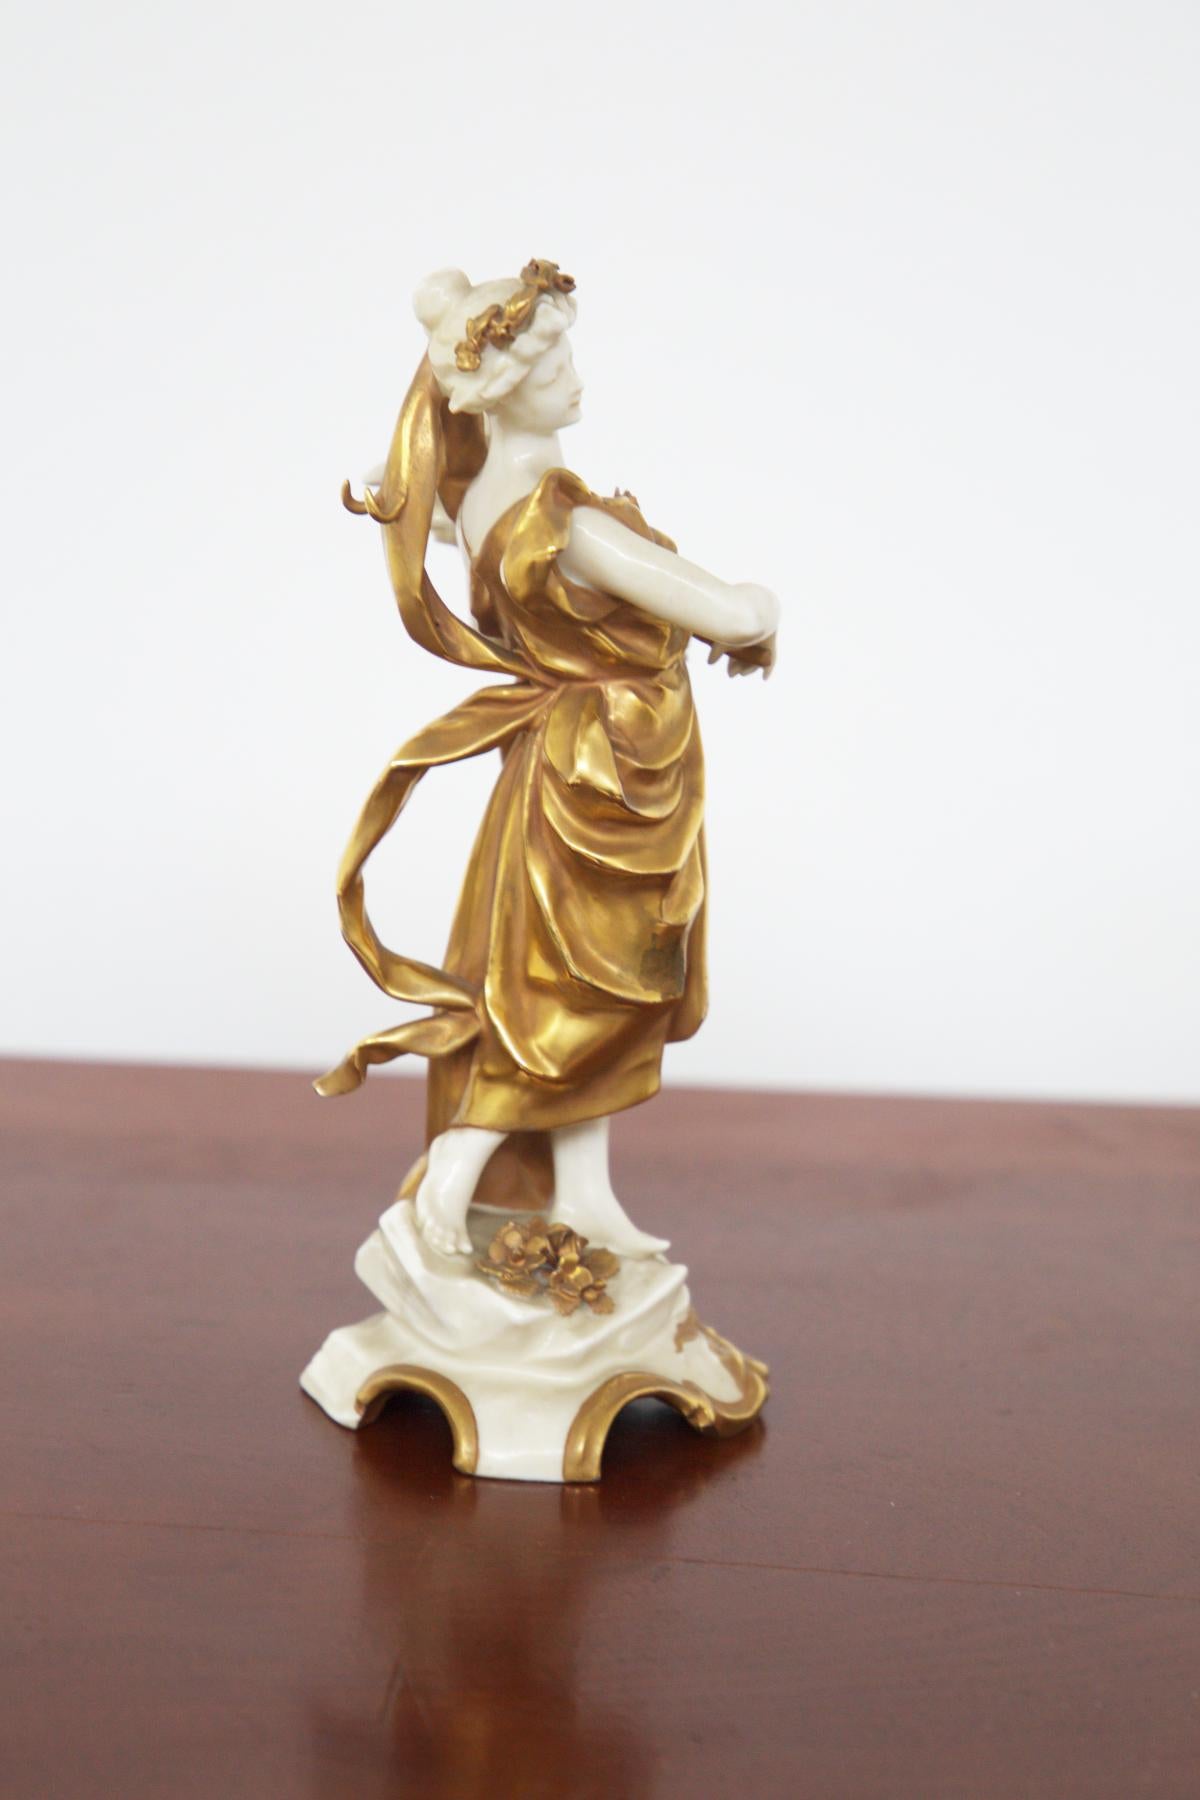 Cute ceramic figurine, part of the 'Signs of the Zodiac' collection, made in the early 20th century from Capodimonte ceramic painted in gold.
Capodimonte is a type of Italian porcelain first developed in the 18th century. It is known for its bright